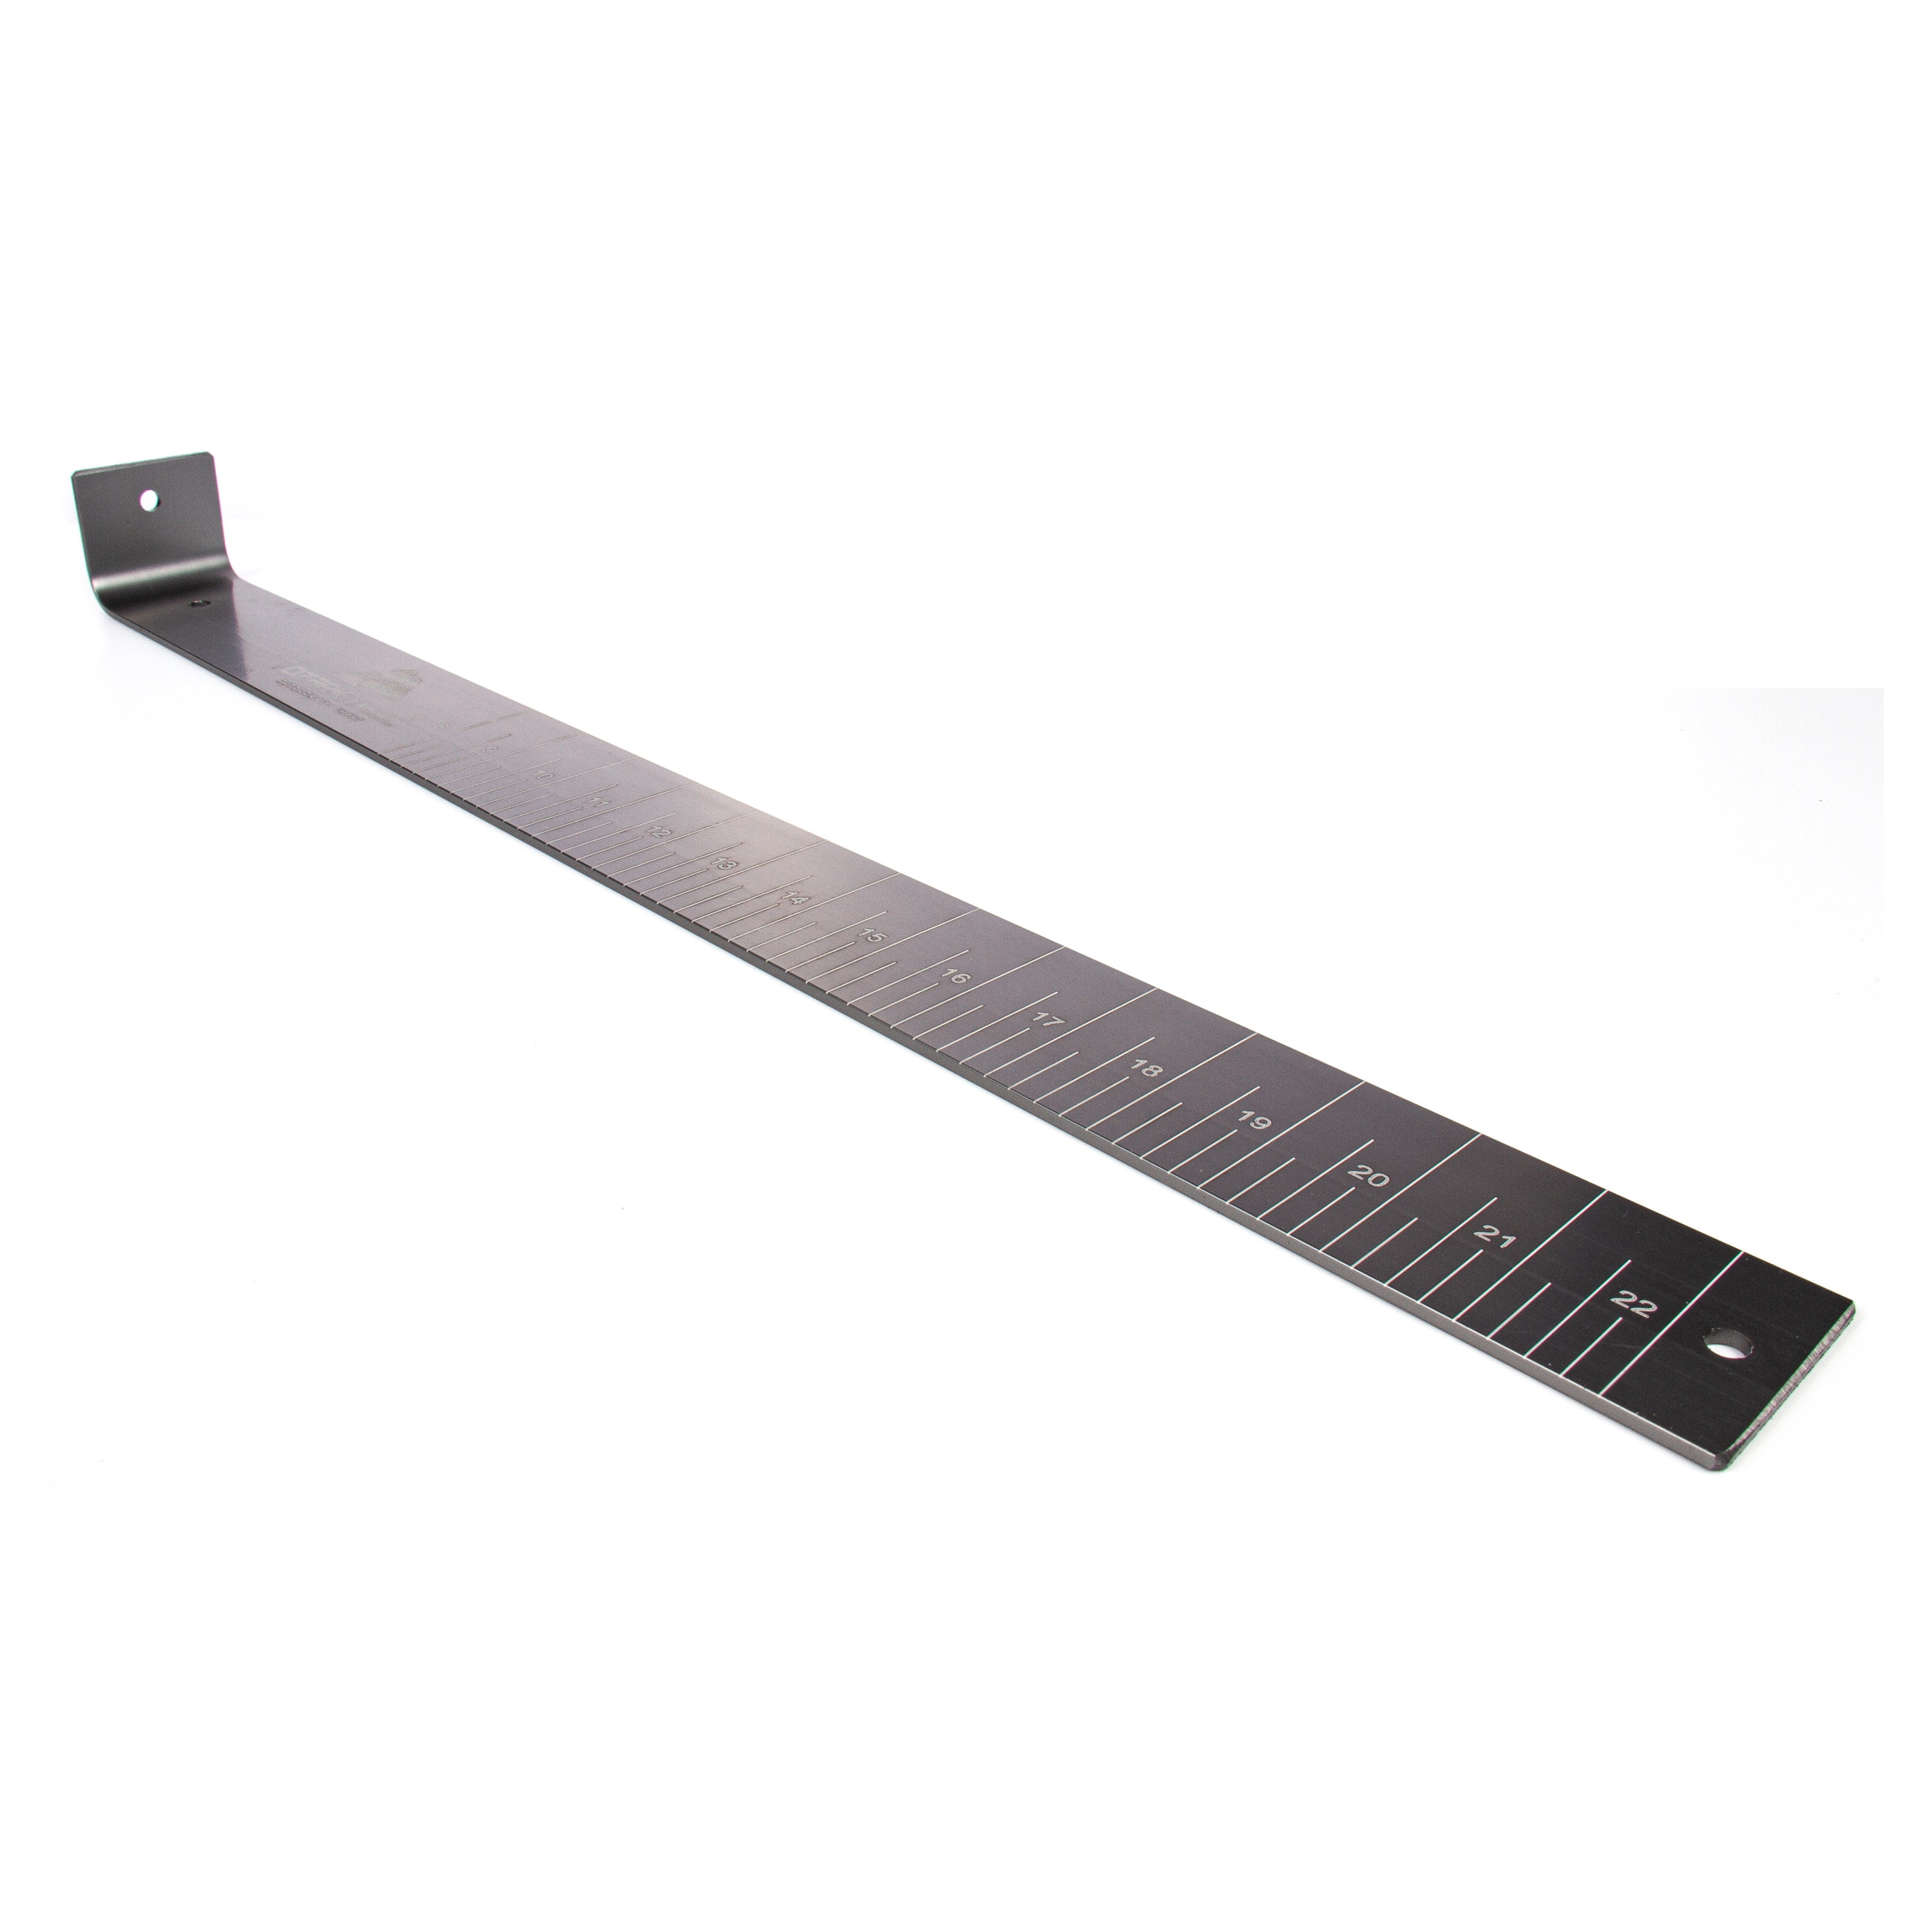 Customized Fish Measuring Board Manufacturers, Suppliers - Factory